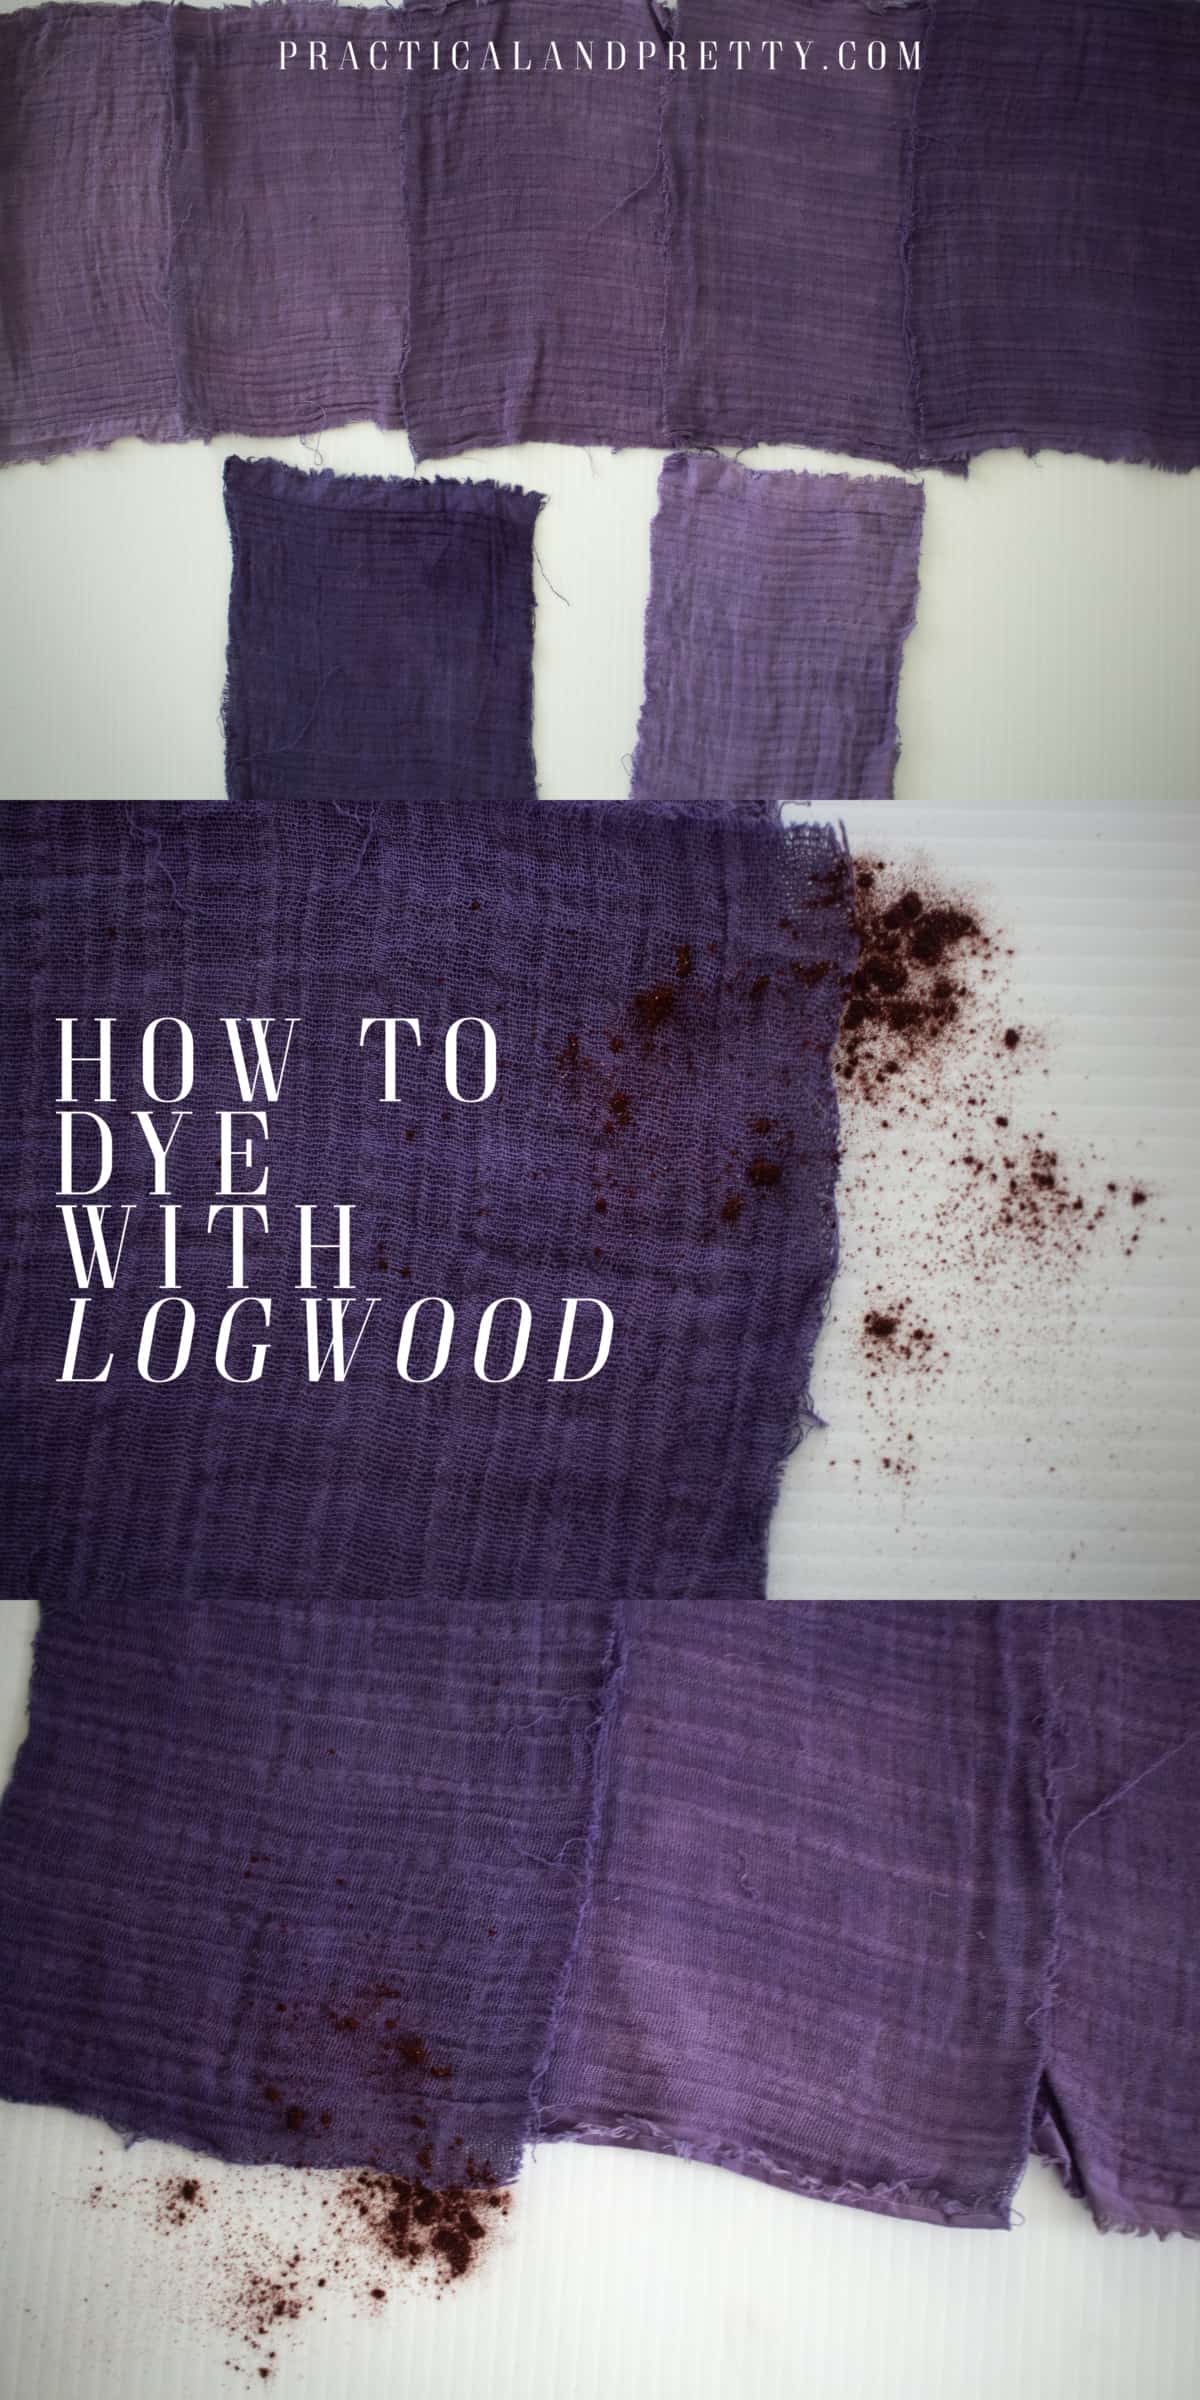 Logwood makes a beautiful dark purple color and depending on a few key factors you can make it various shades! See how here.